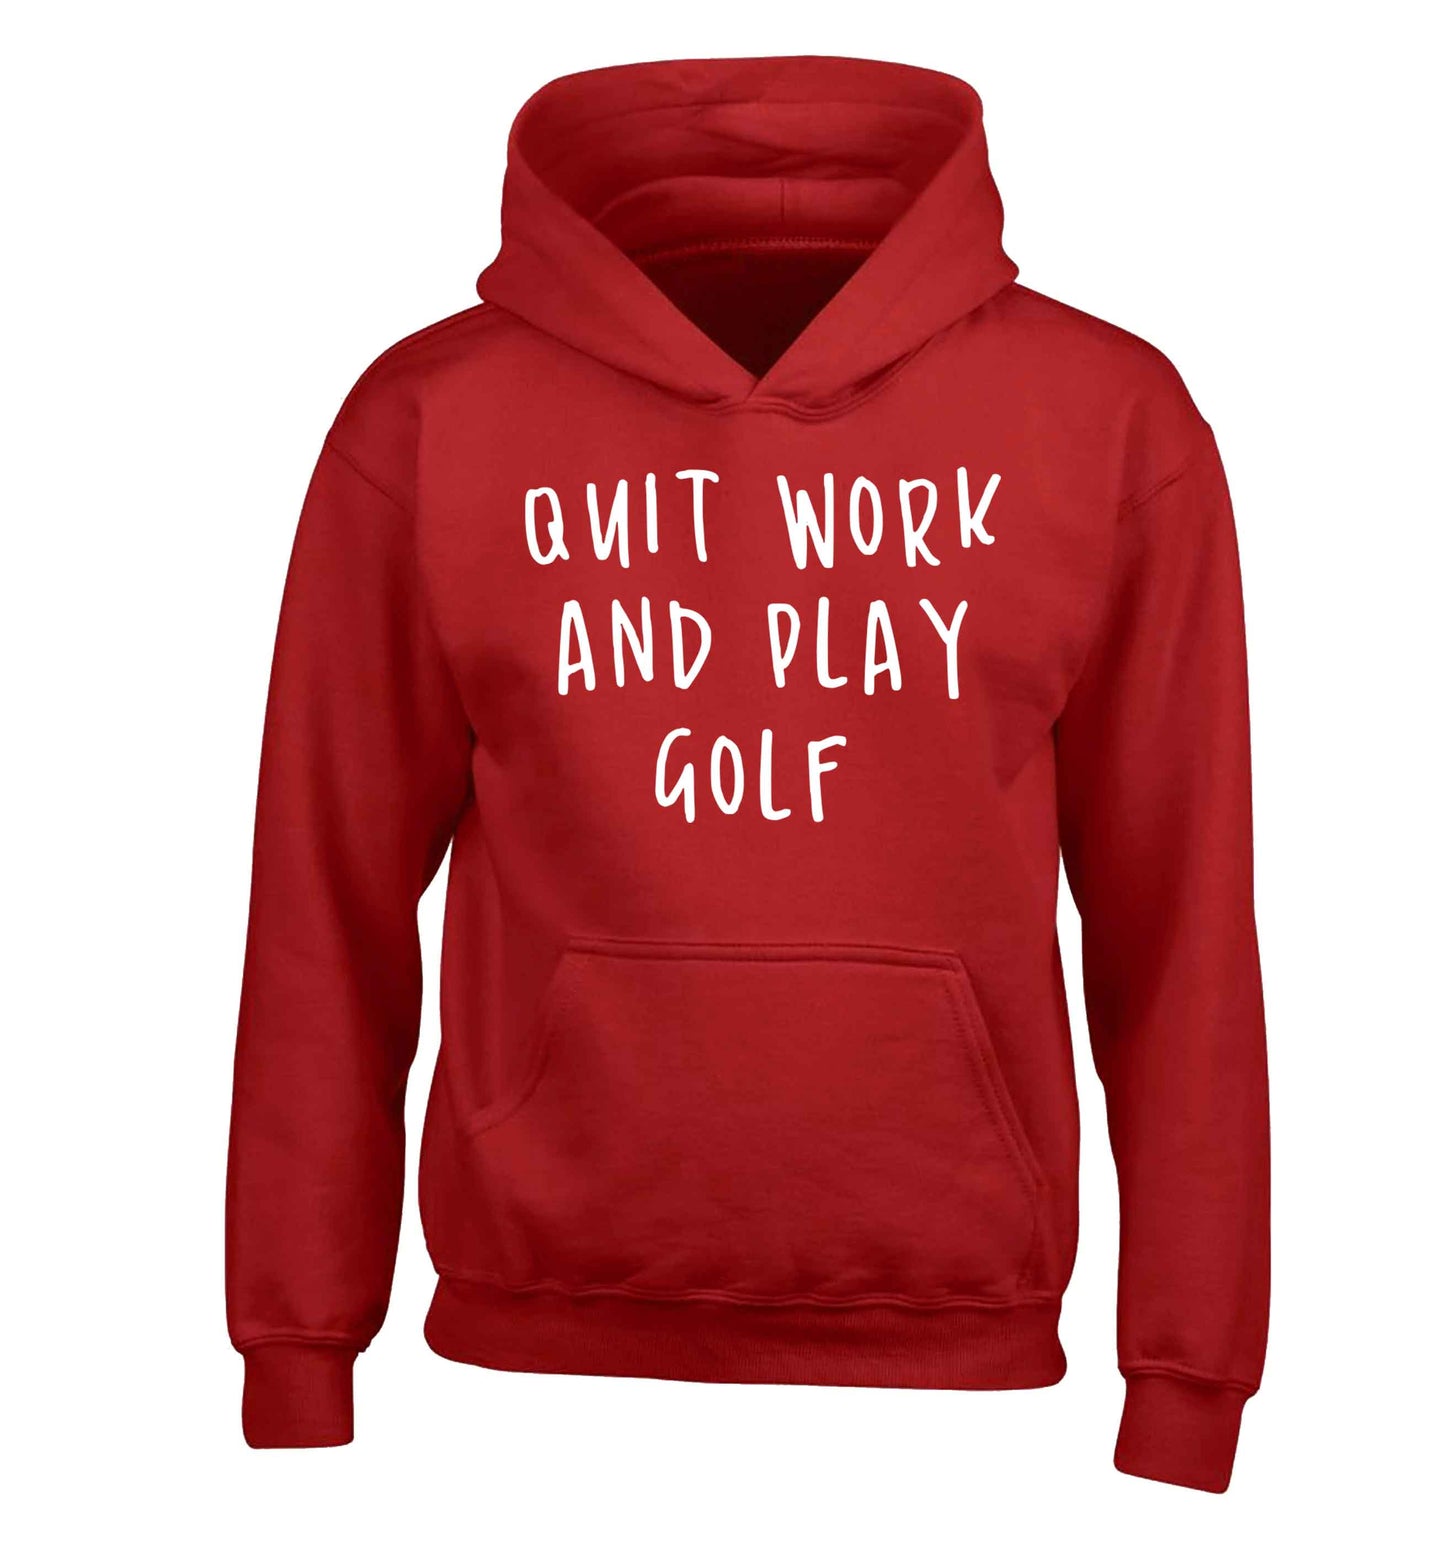 Quit work and play golf children's red hoodie 12-13 Years